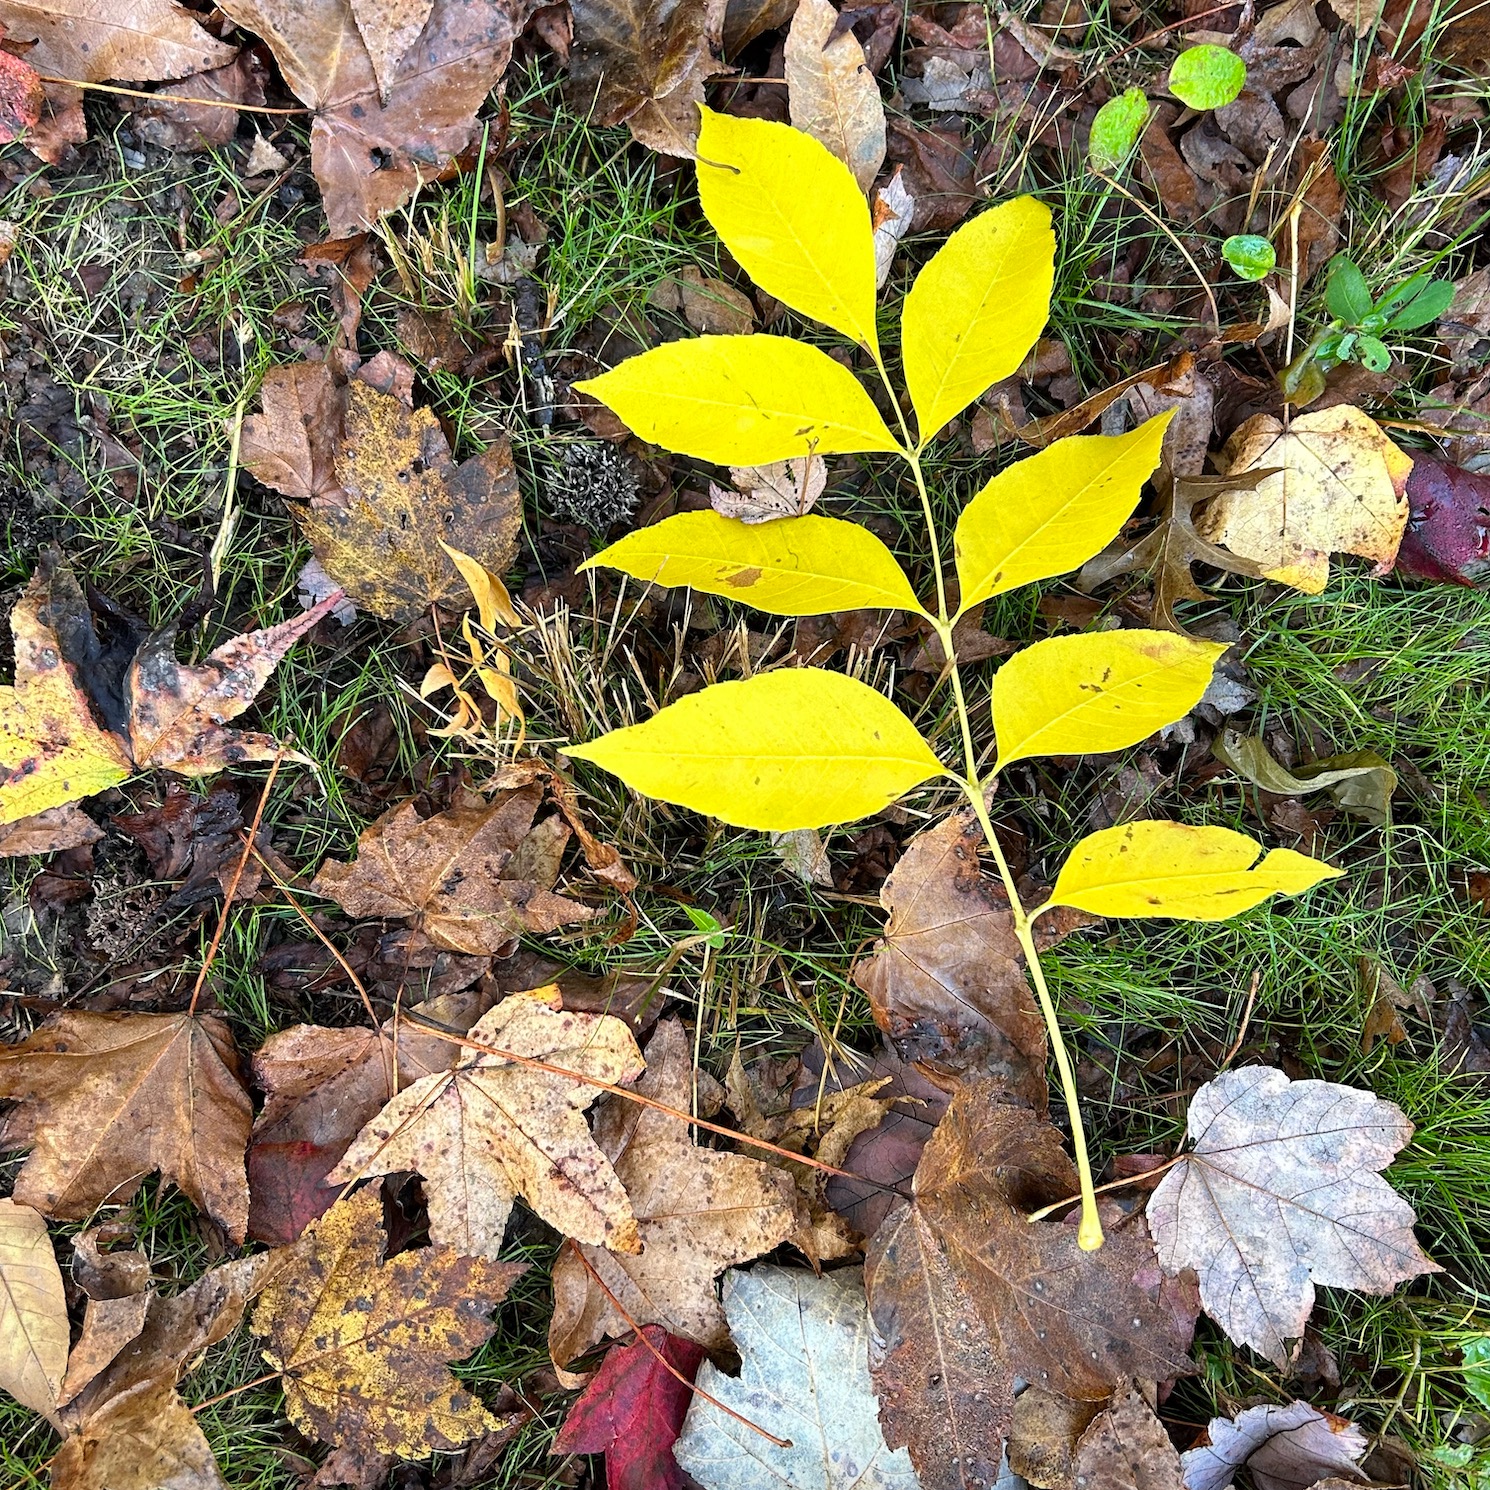 A bright yellow complex leaf on the ground with dry, dull brown leaves